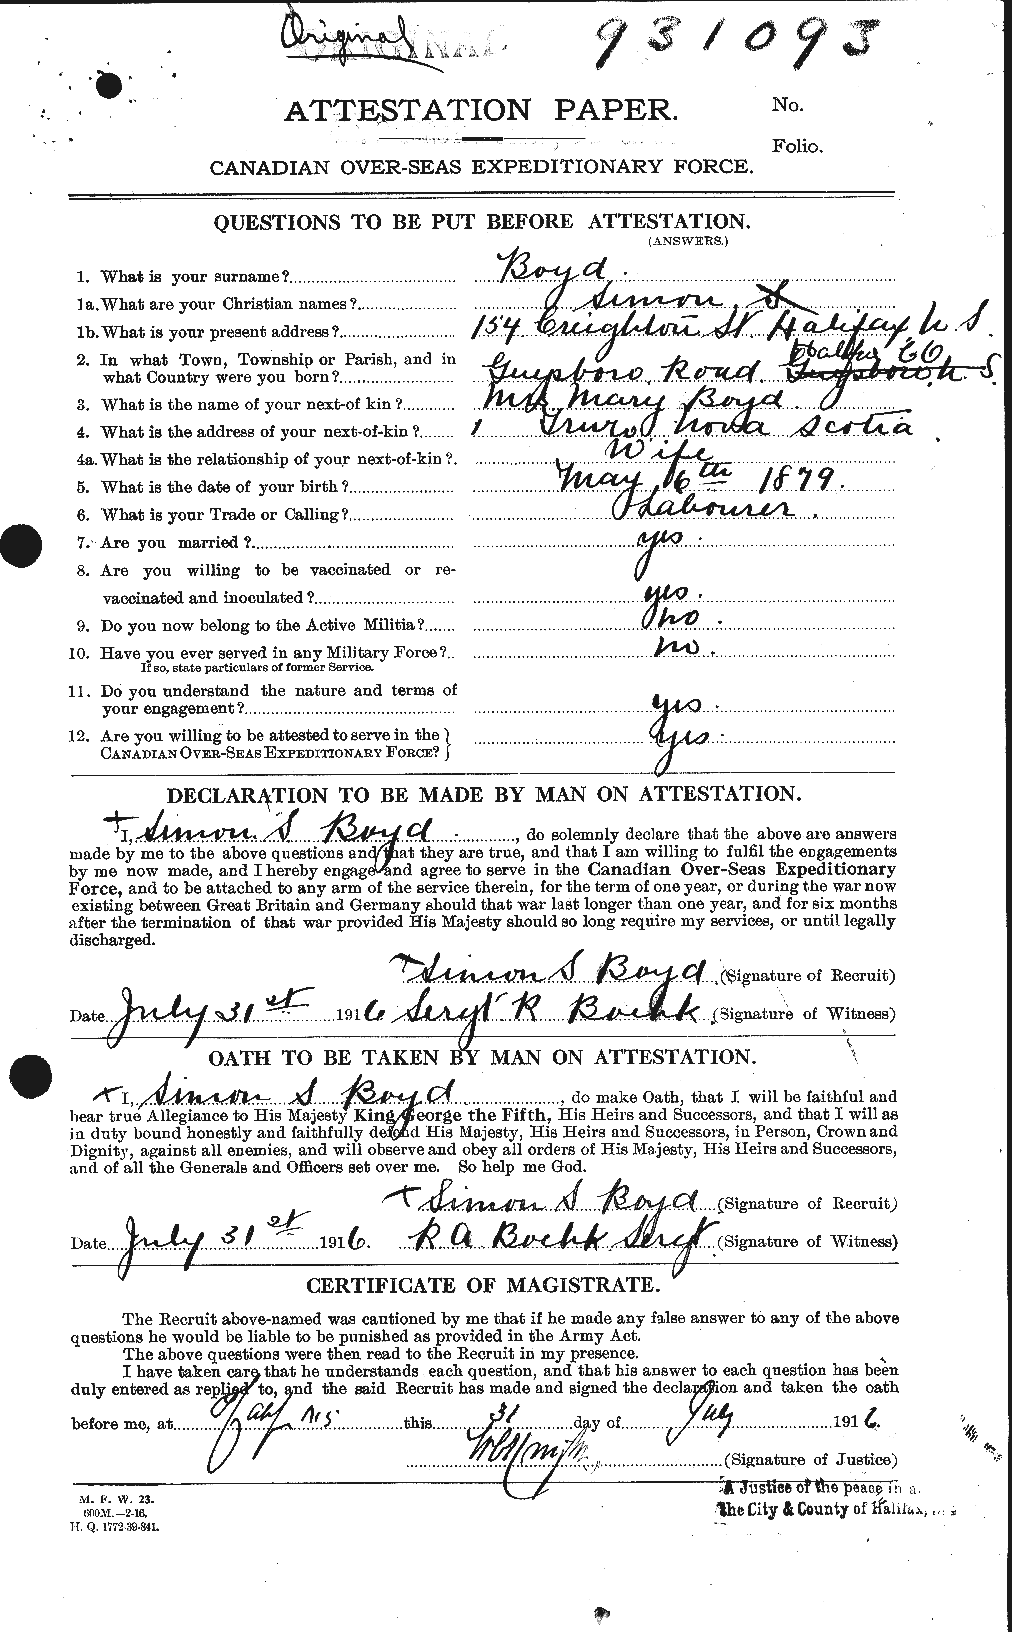 Personnel Records of the First World War - CEF 257885a